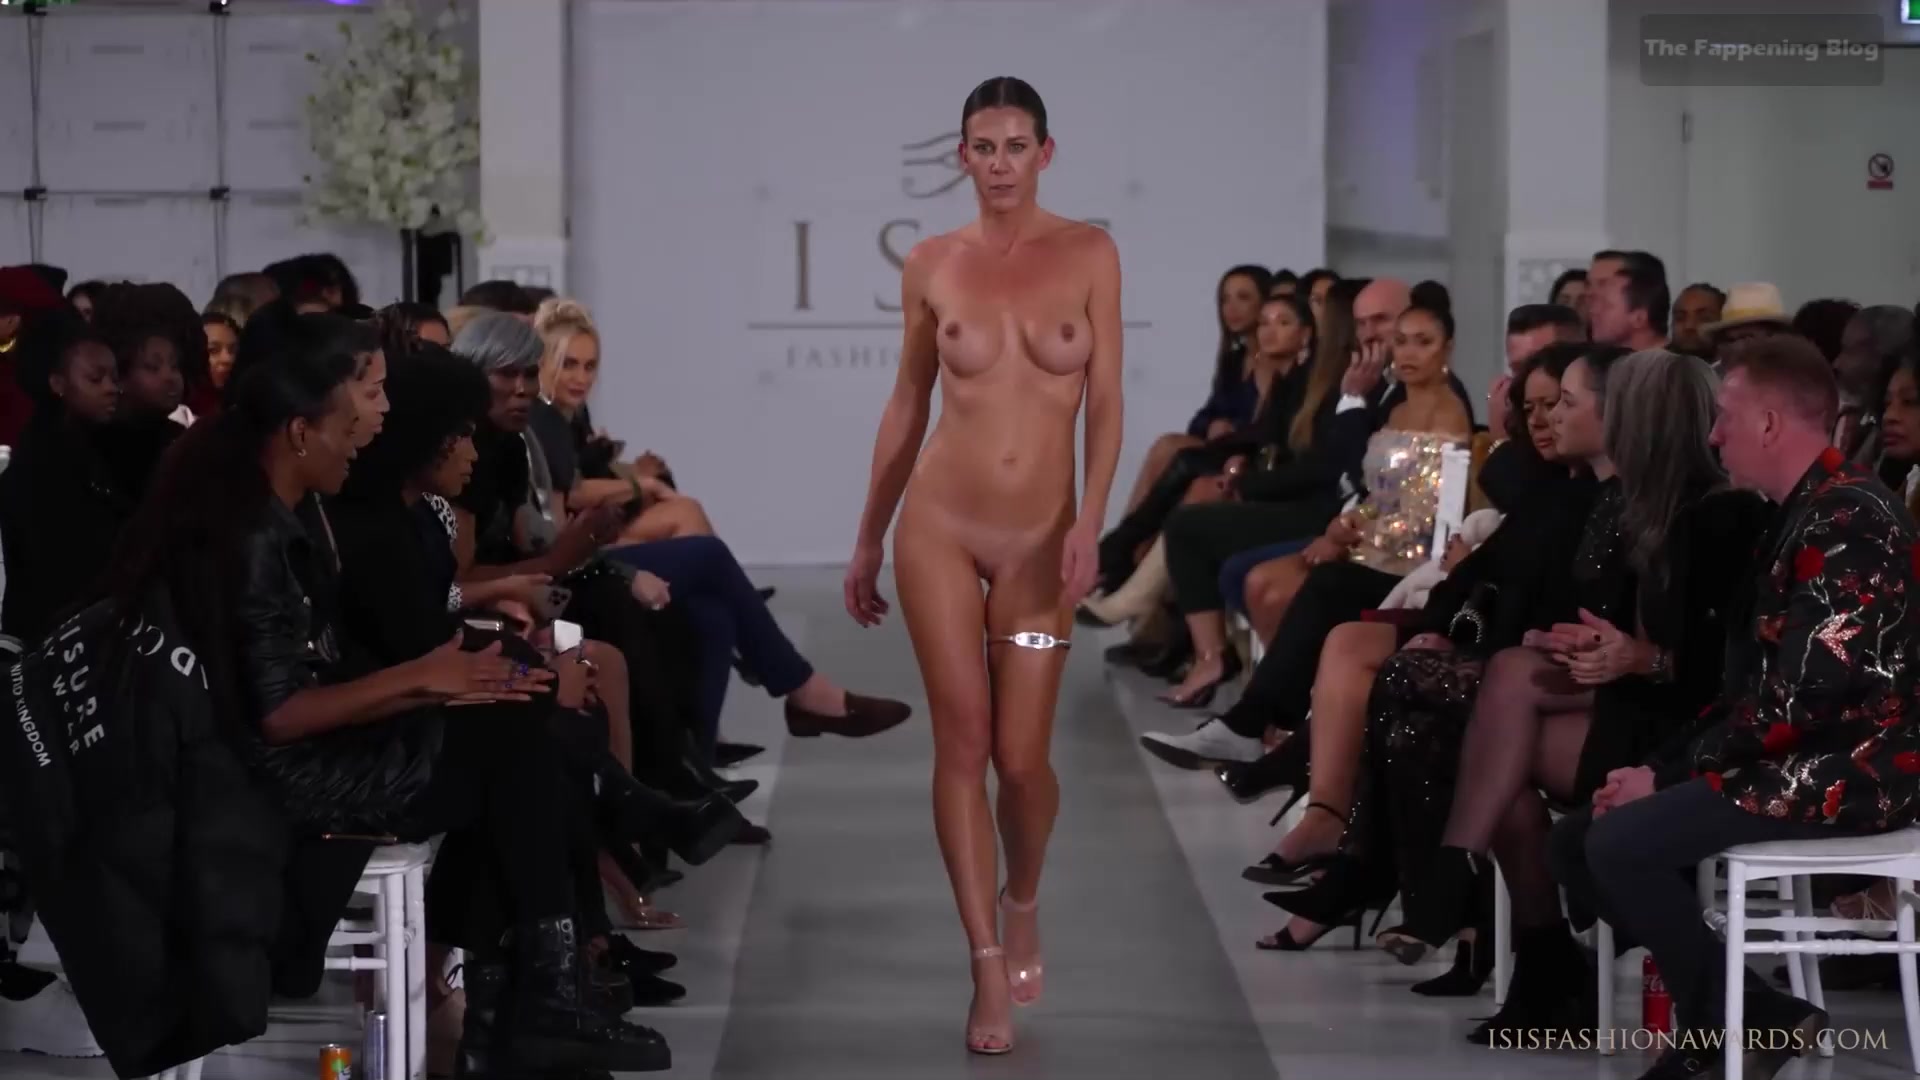 1920px x 1080px - Isis Fashion Awards â€“ Nude Accessory Runway Catwalk Show (Video) |  #TheFappening